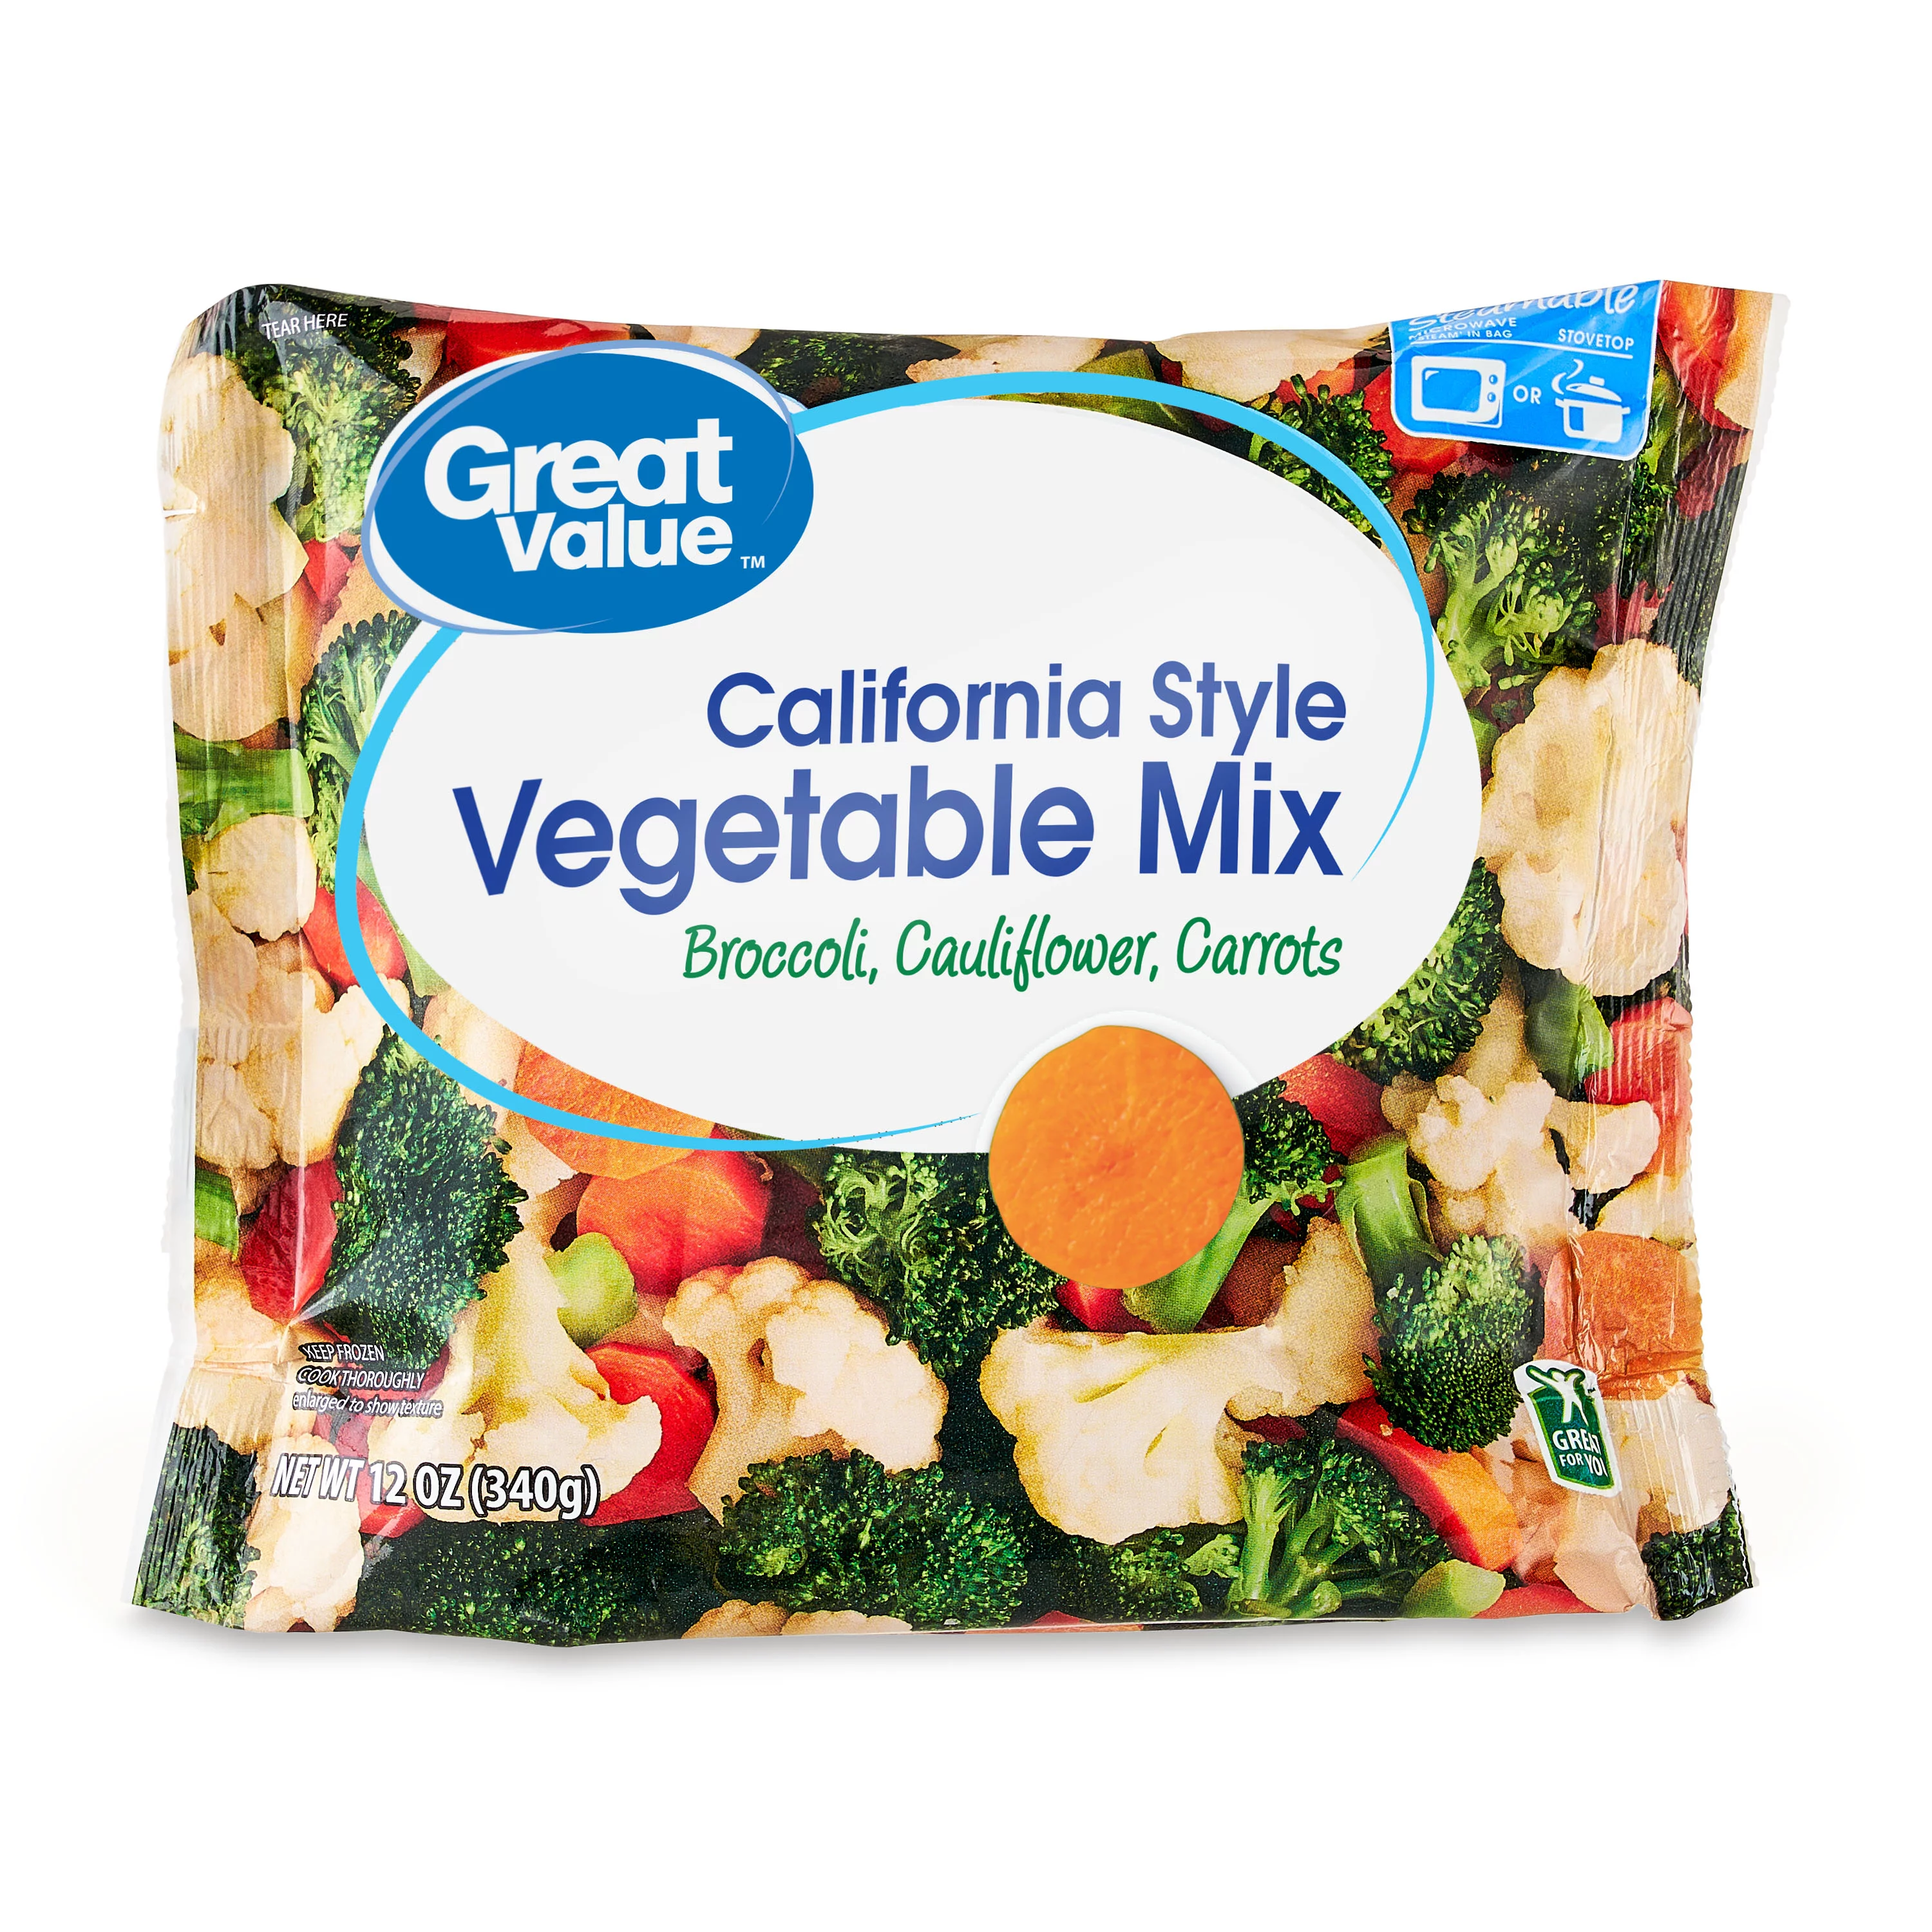 Great Value™ California Style Vegetable Mix 12 oz. Bag